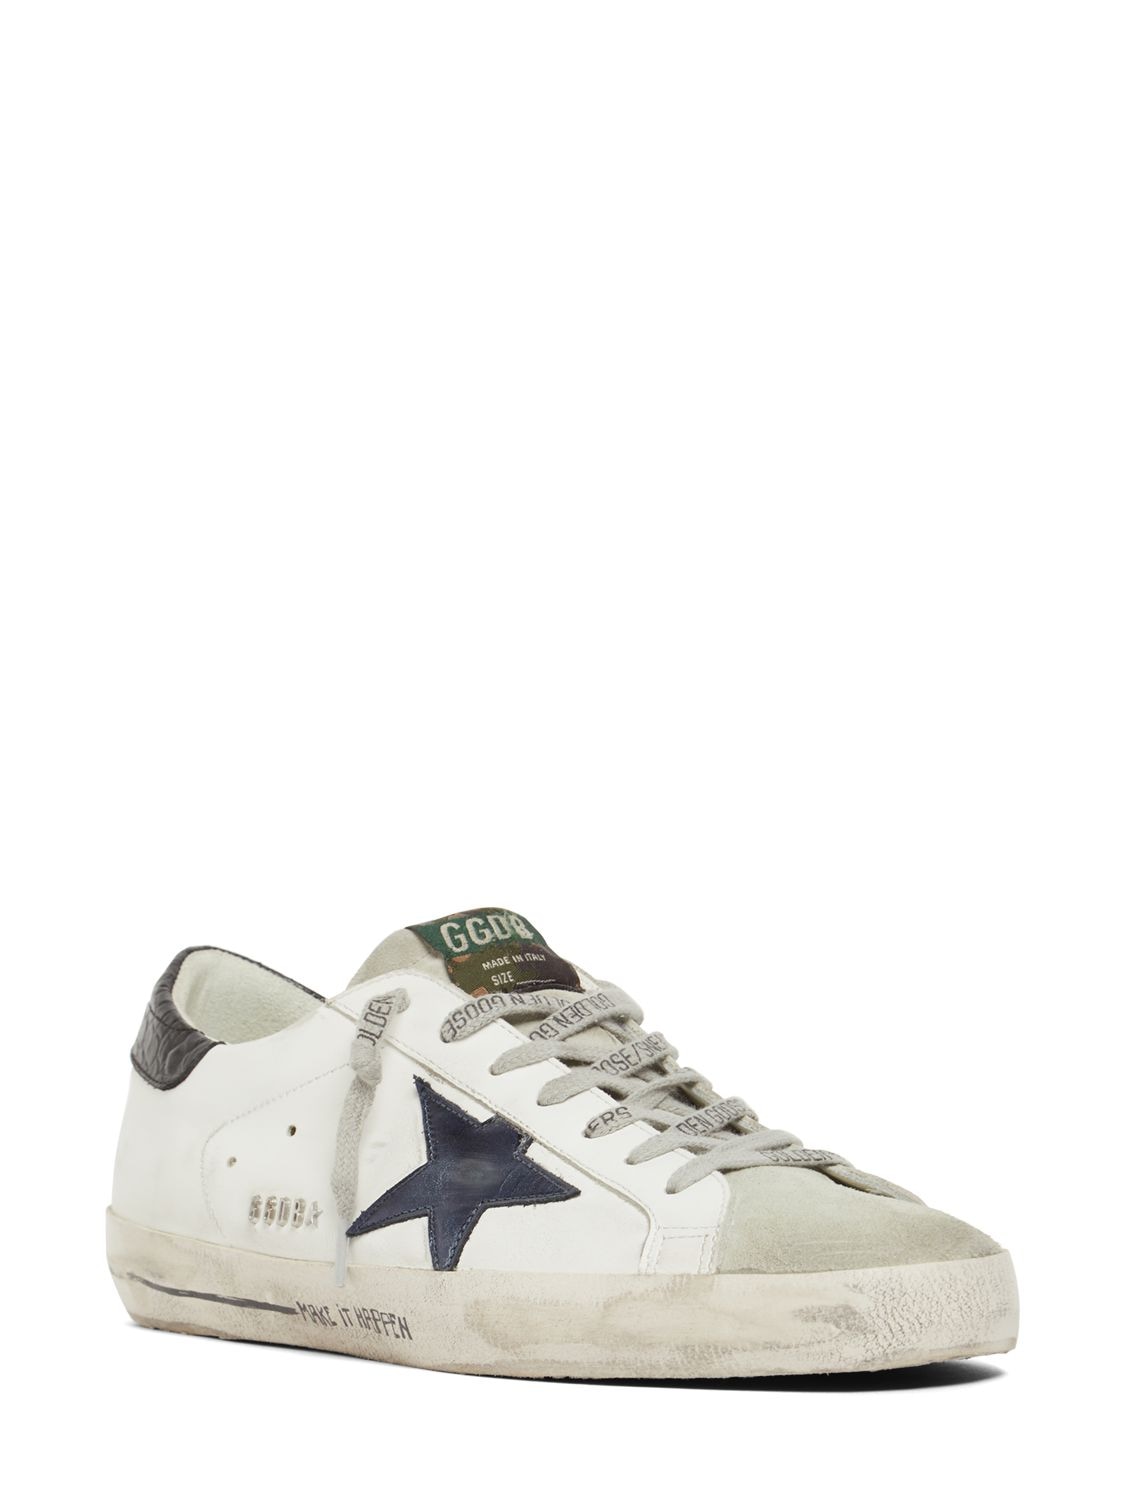 Shop Golden Goose Super Star Leather & Suede Sneakers In White,navy